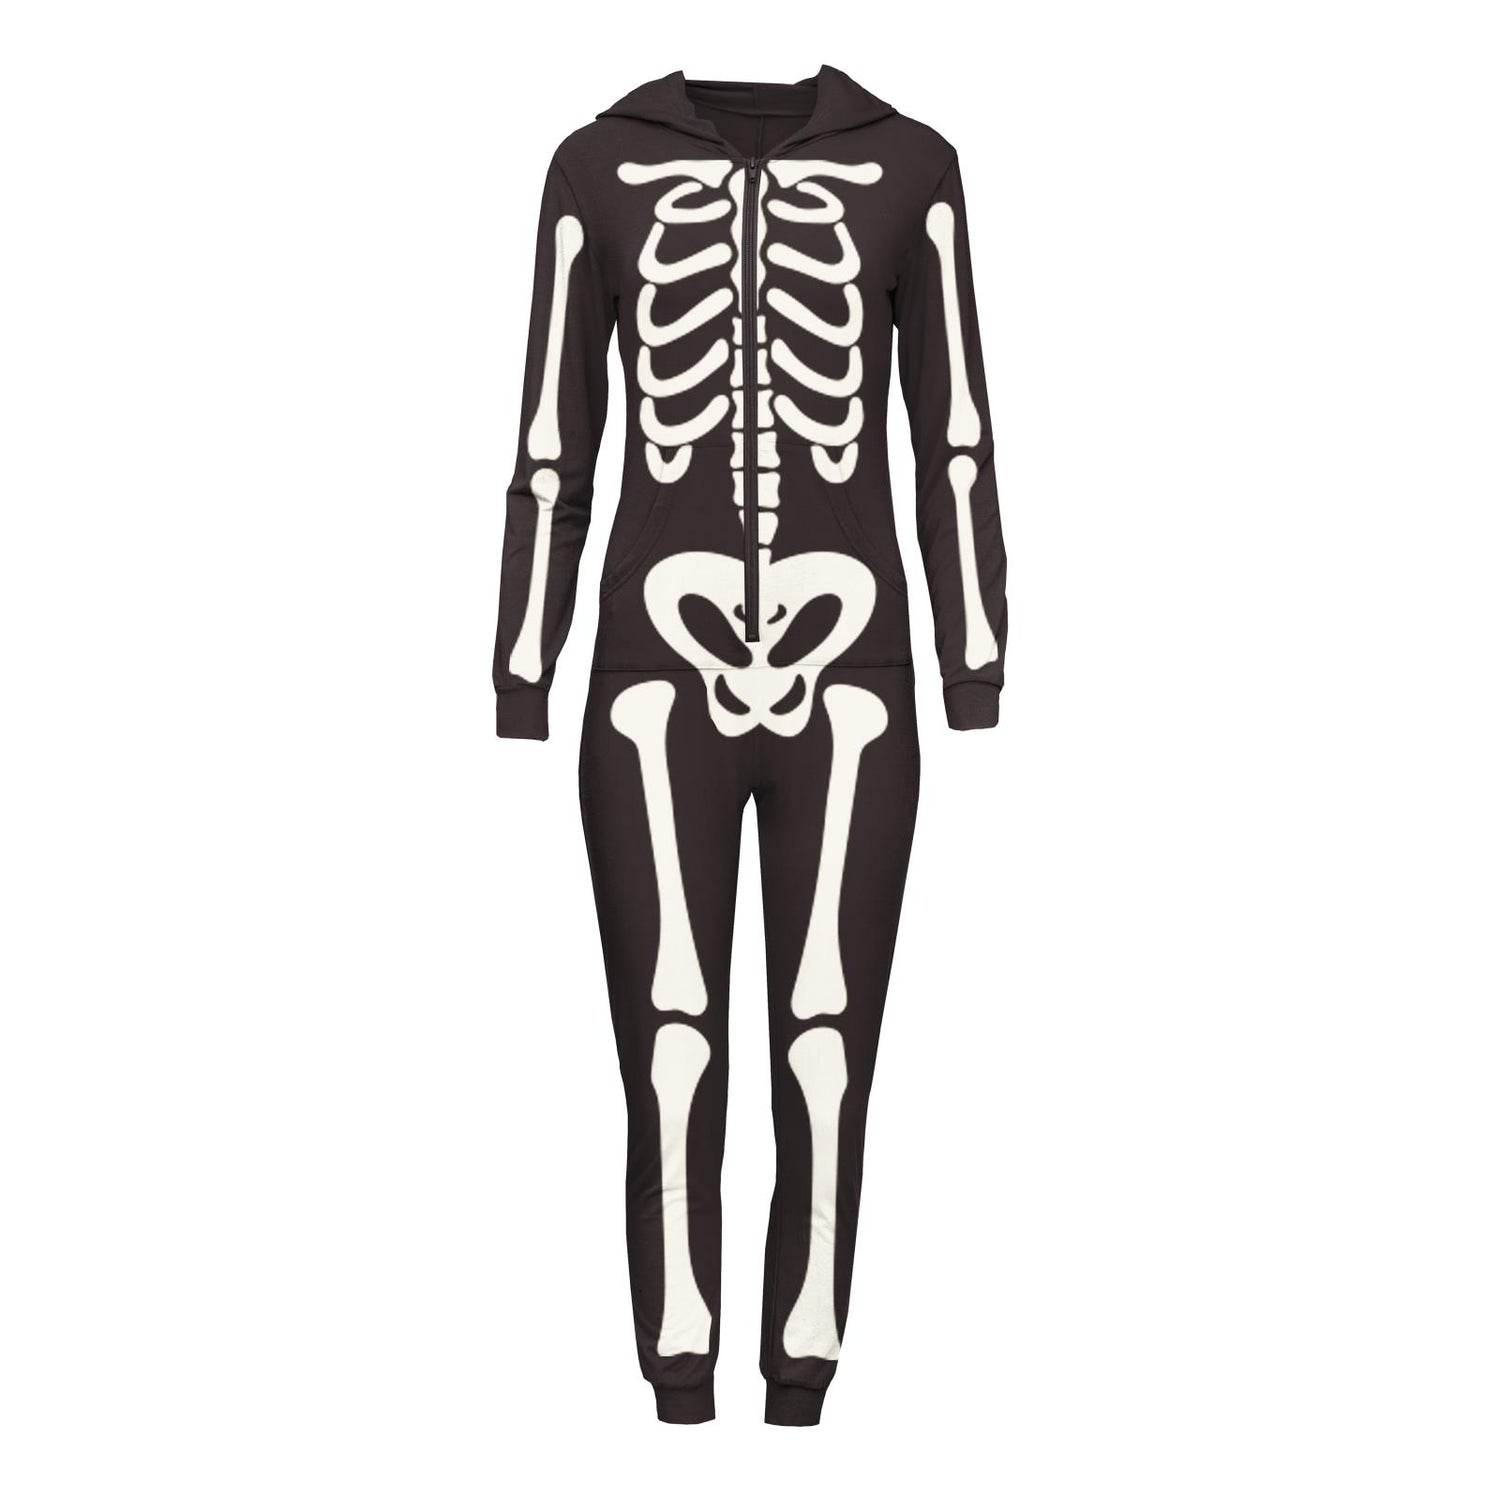 Women's Graphic Long Sleeve Jumpsuit with Hood in Skeleton